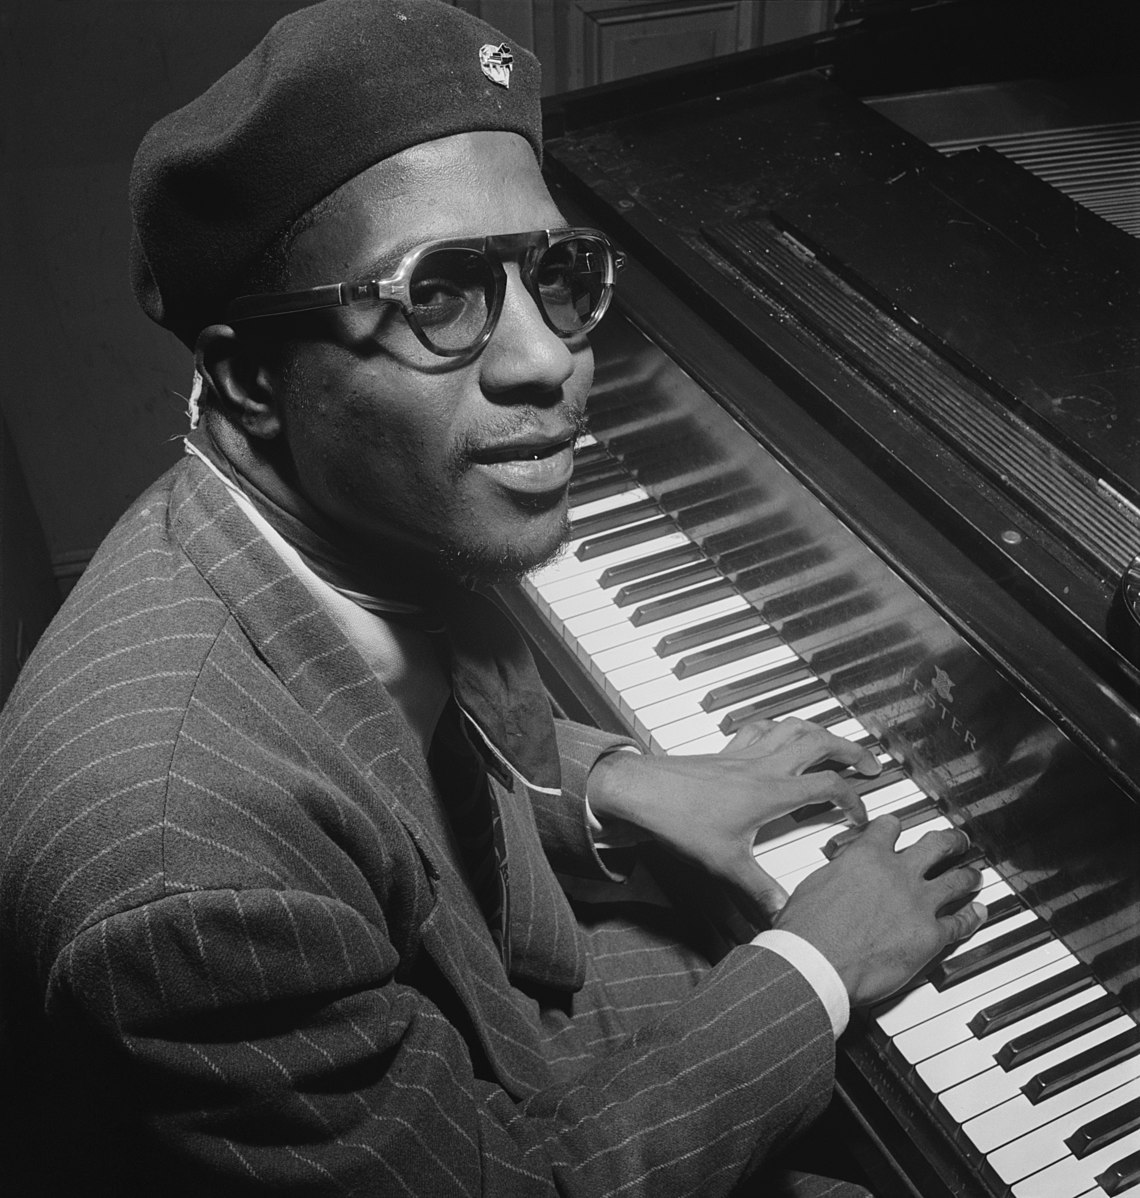 Thelonious Monk - Jazz Hour with Thelonious Monk, Vol. 2: Epistrophy